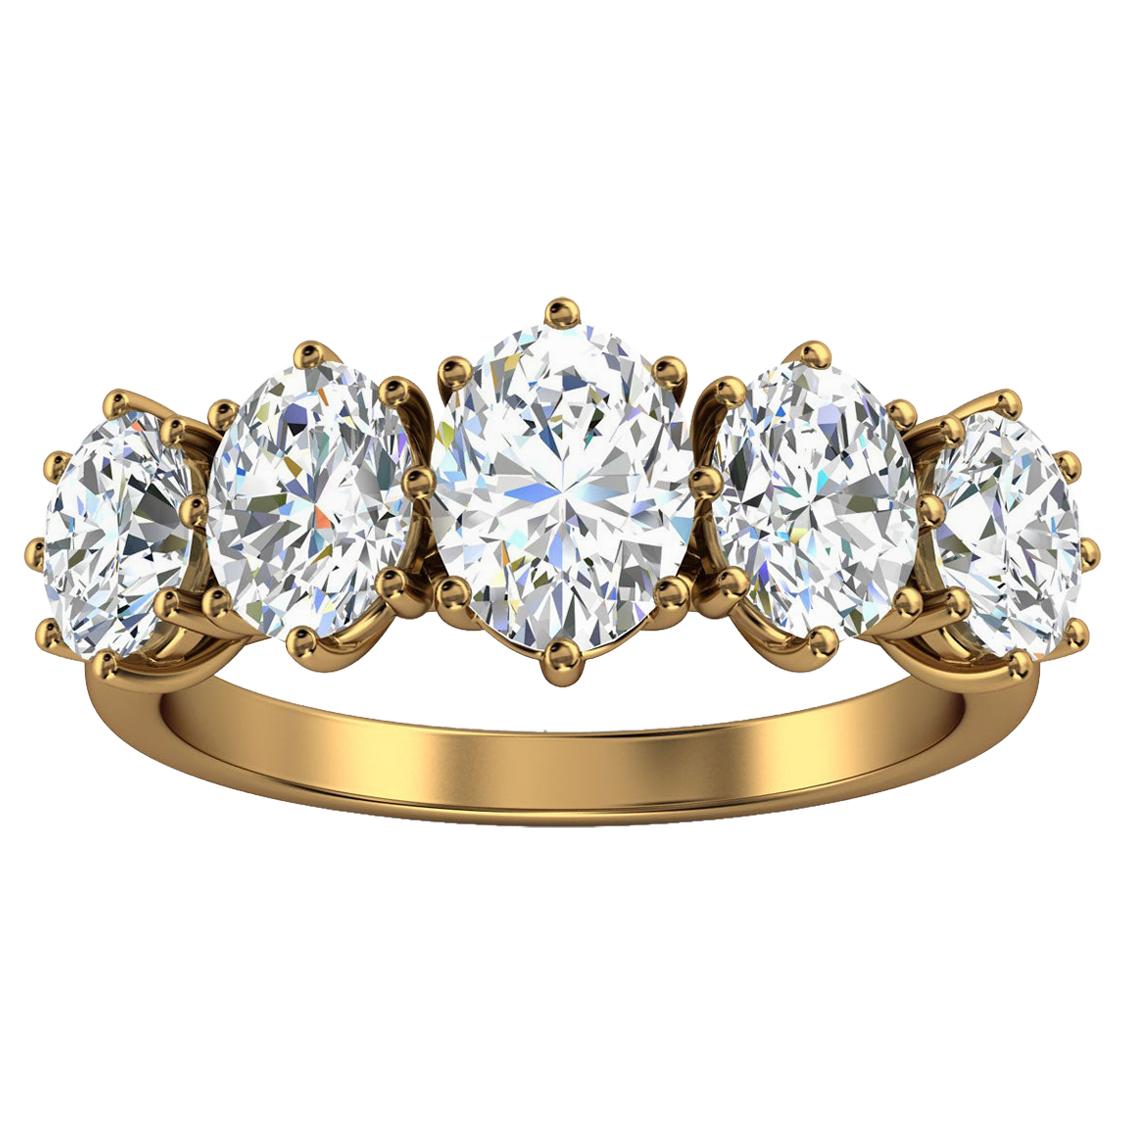 18k Yellow Gold Sigalit Petite Rustic Oval Diamond Ring 1 1/2 Carat T.W For Sale